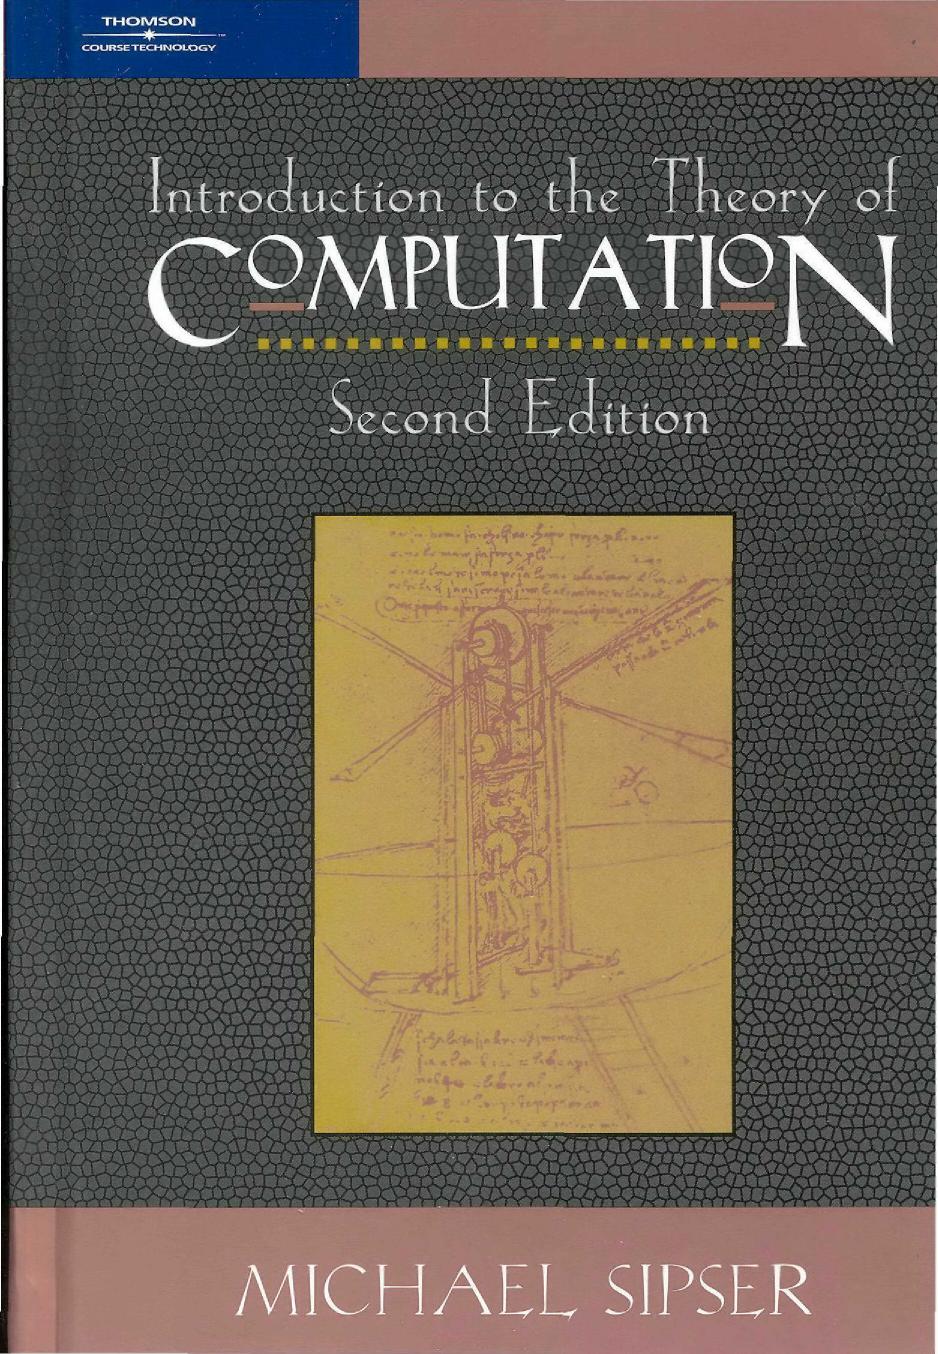 Introduction to the Theory of Computation Second Edition by Michael Sipser B01_0393